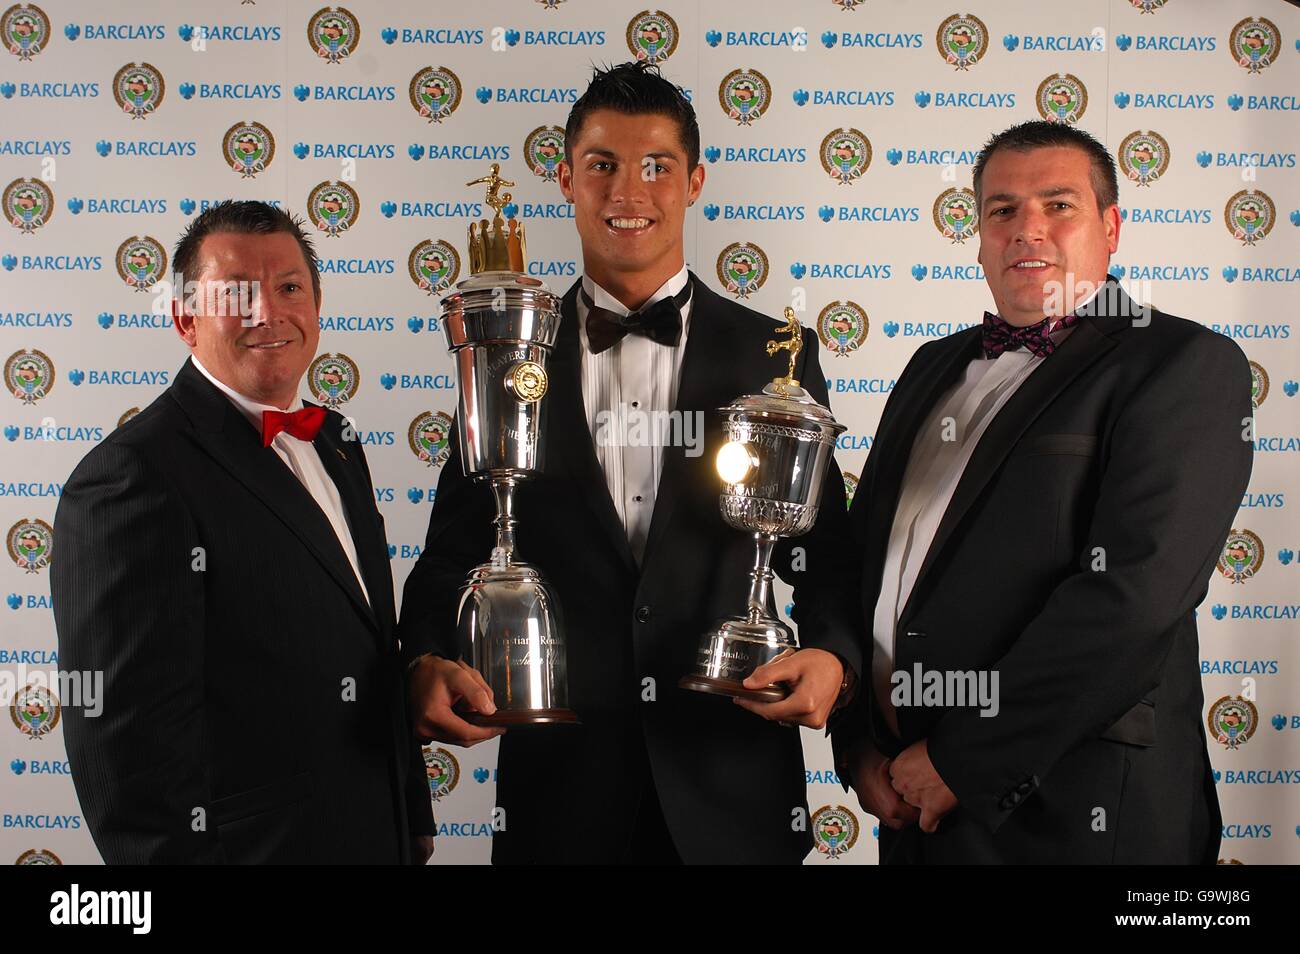 Soccer - PFA Player of the Year Awards 2007 - Grosvenor House Hotel. Manchester United's Cristiano Ronaldo with his PFA Young Player of the Year and Player of the Year awards Stock Photo